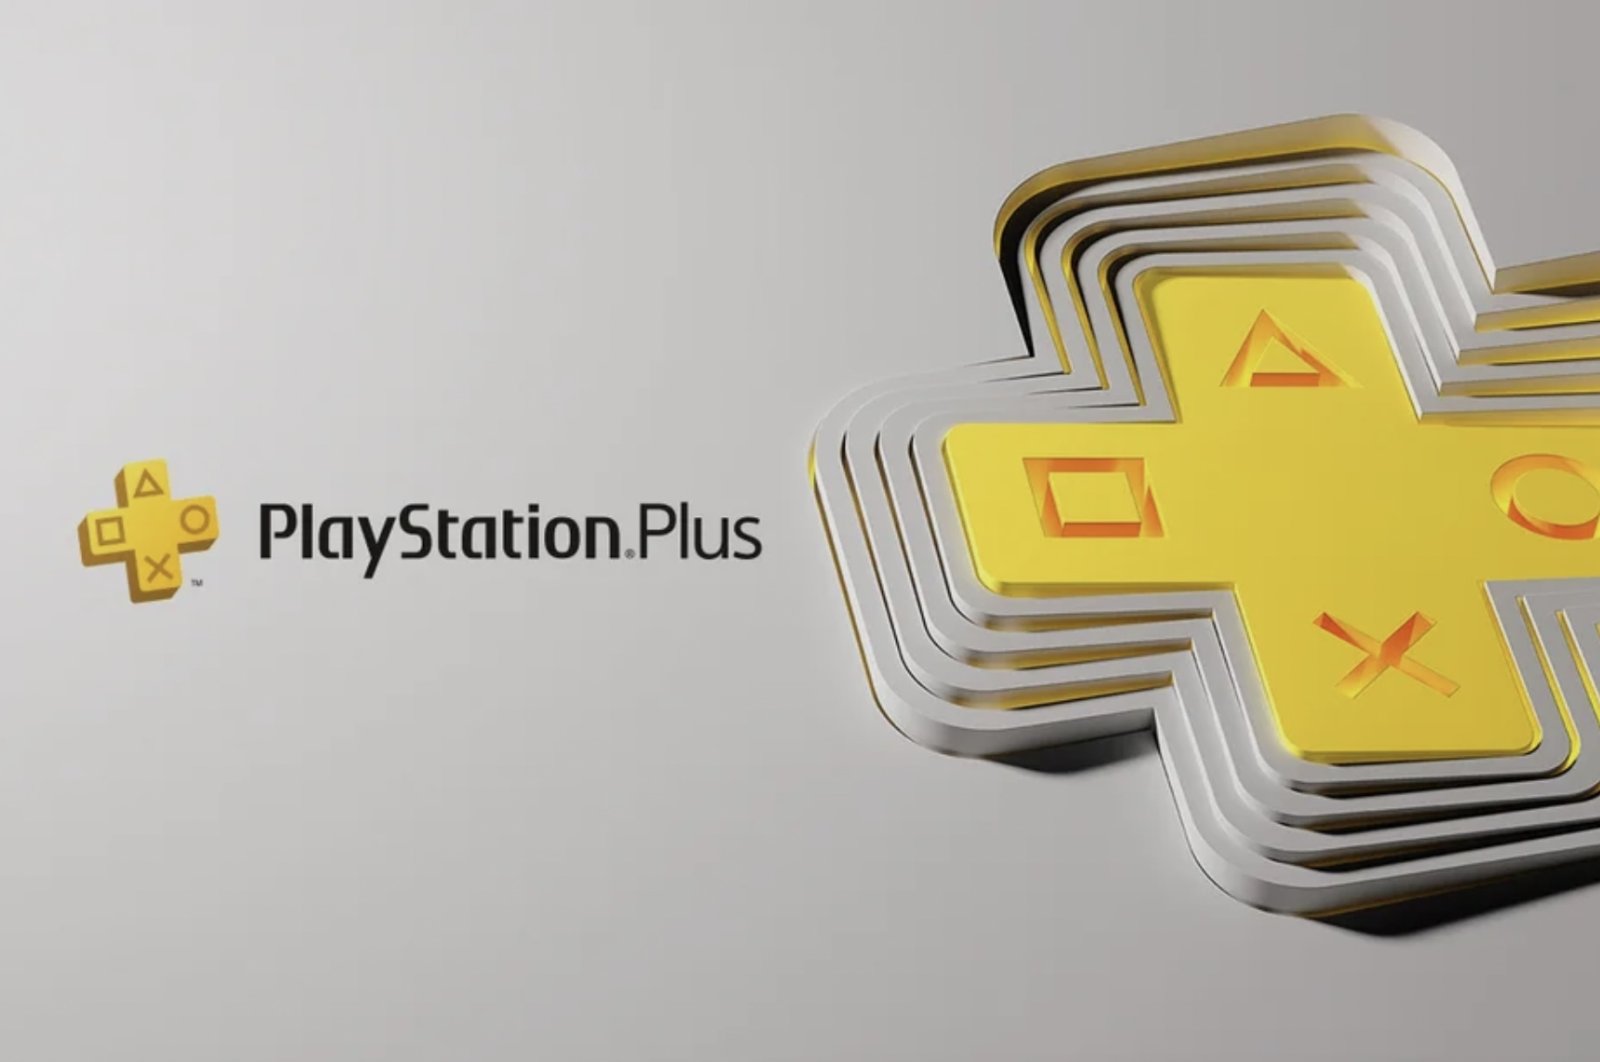 The PlayStation Plus logo is seen in this illustration. (Photo courtesy of Sony)